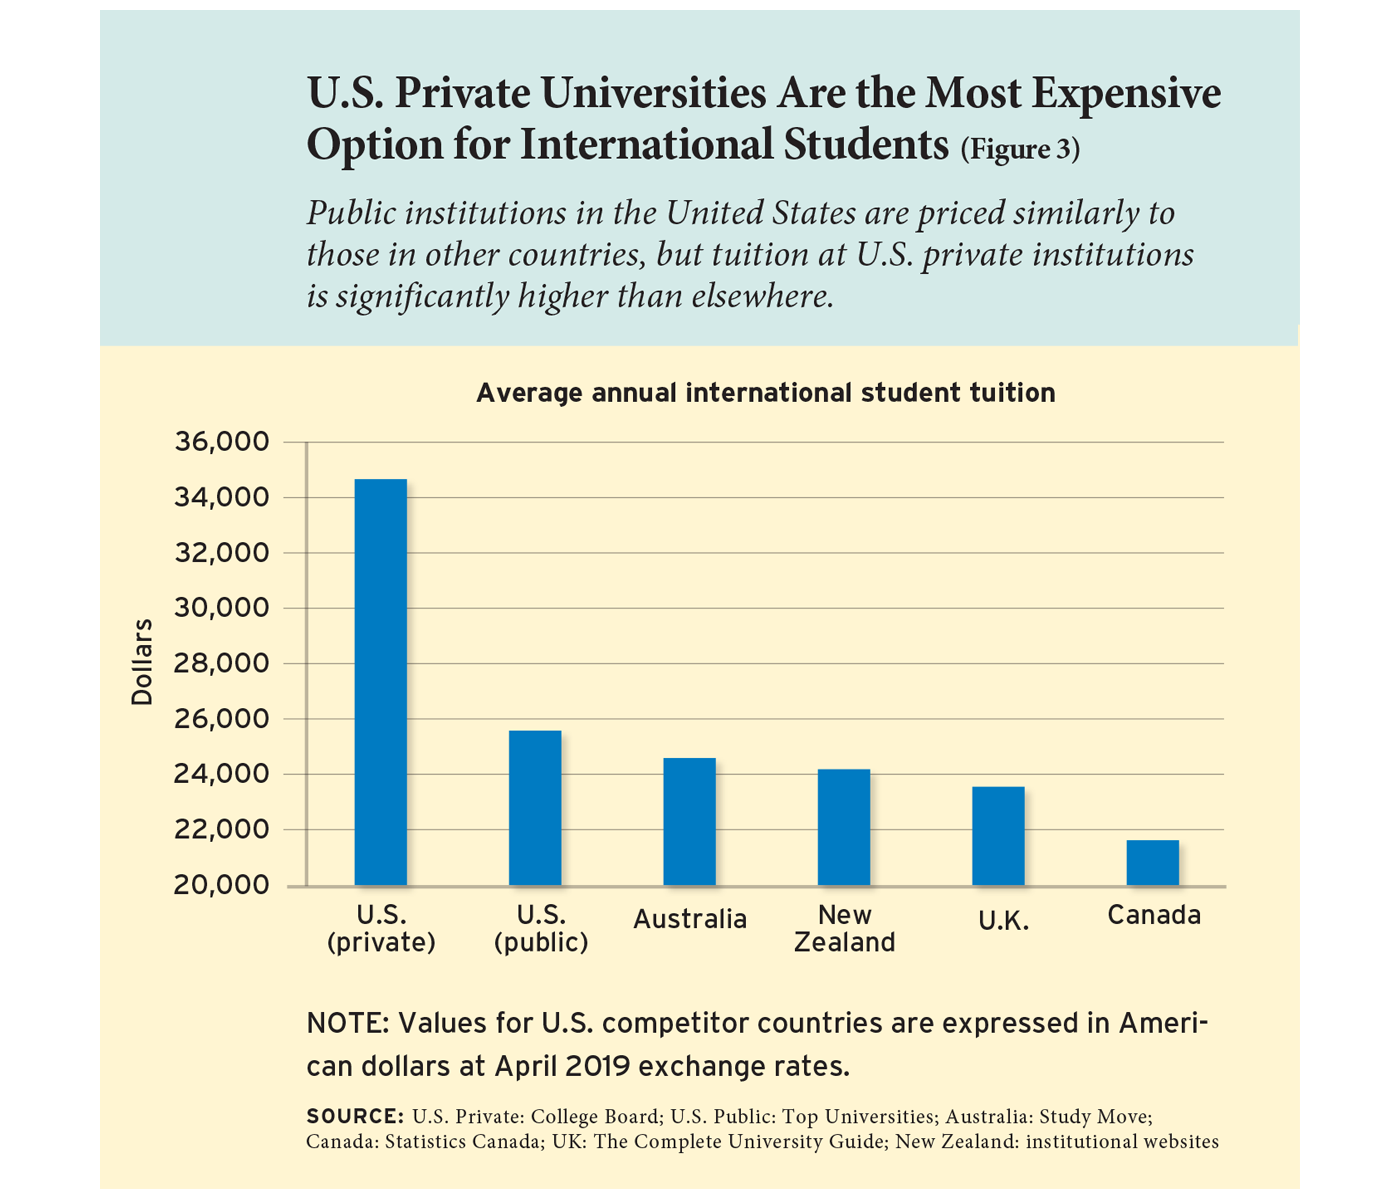 U.S. Private Universities Are the Most Expensive Option for International Students (Figure 3)